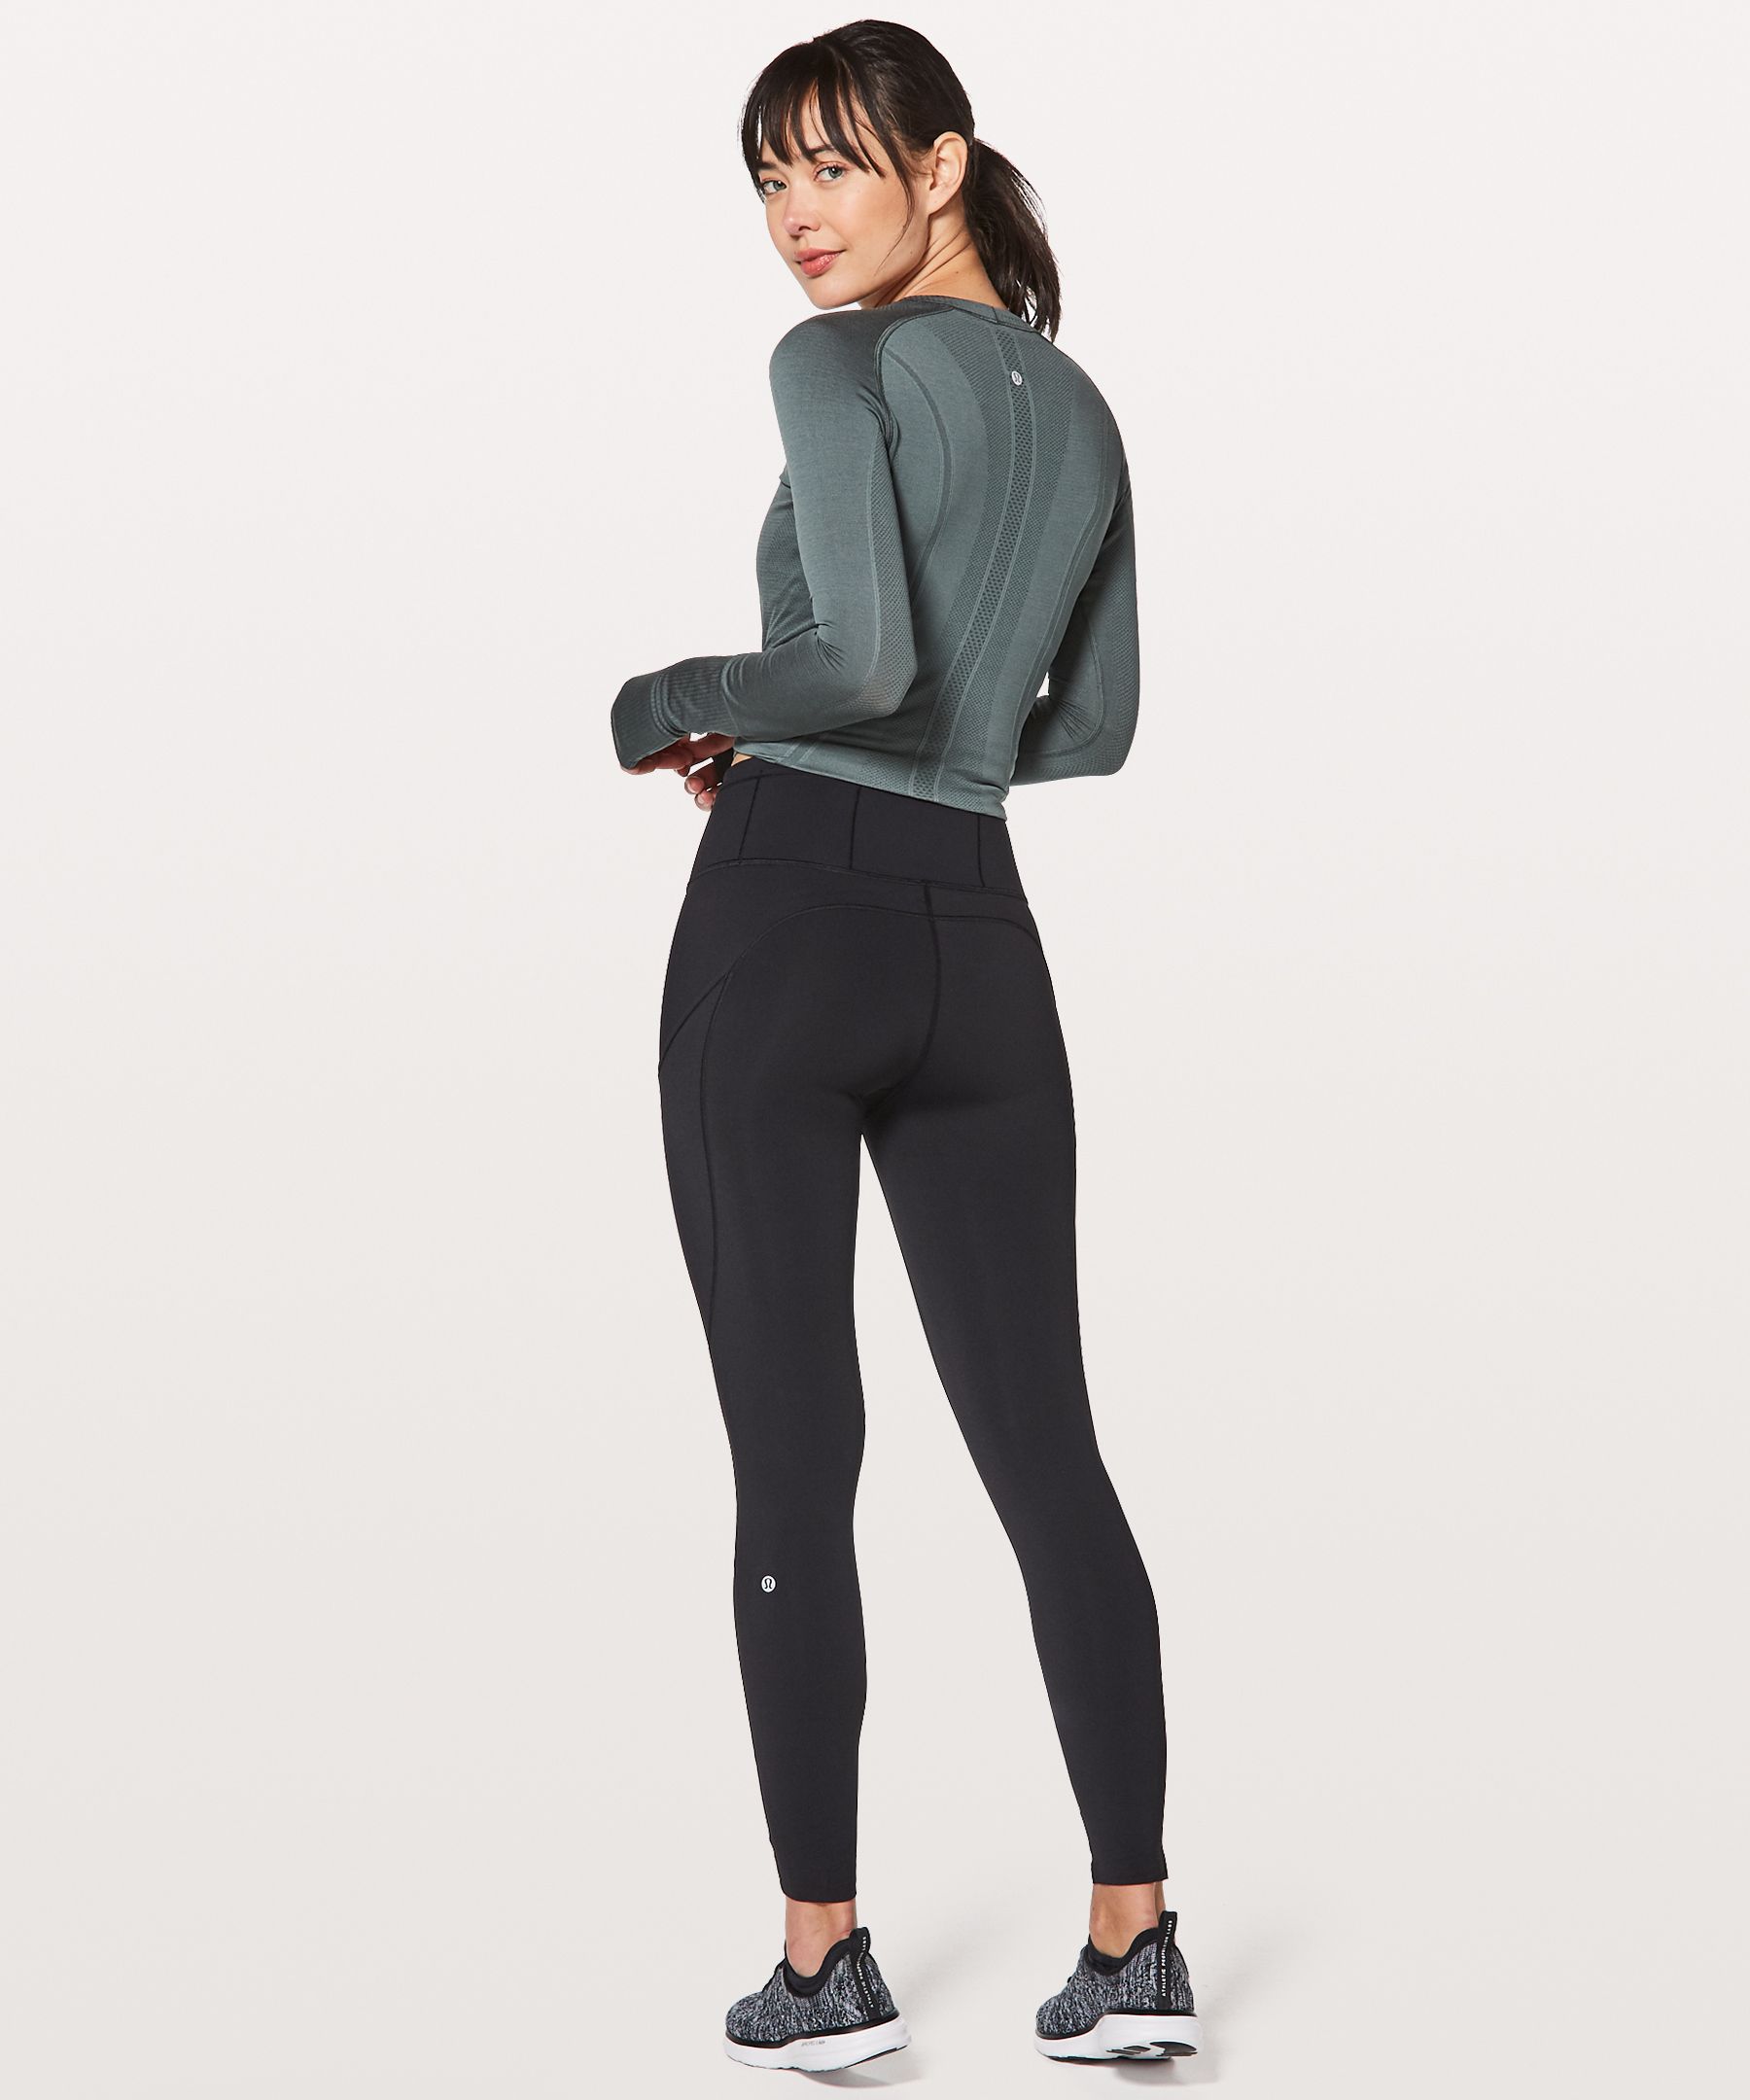 lululemon Fast * Free High-Rise Tight 25 True Navy Size 0 MSRP $128.00  **NWT**